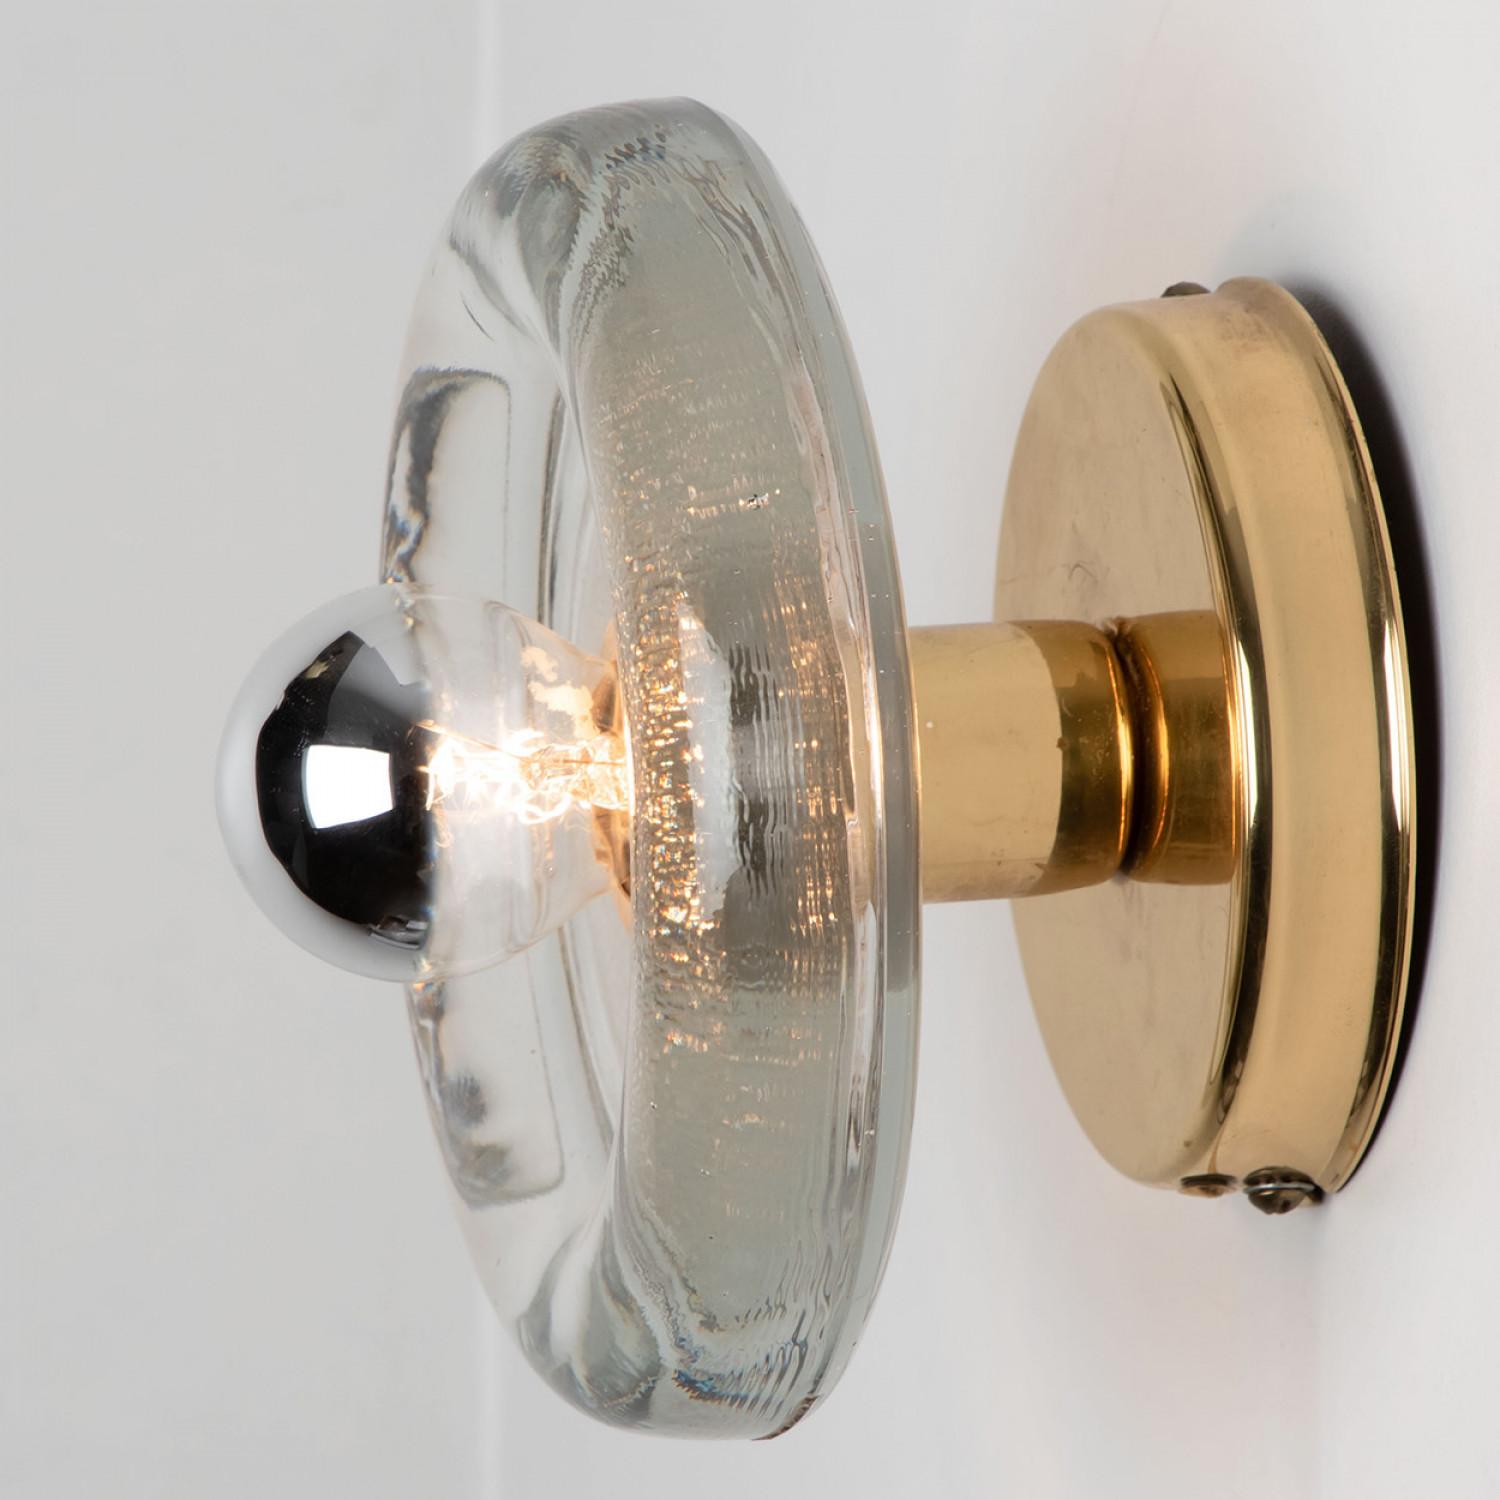 
A pair of Putzler wall light in sculptural glass on a round brass frame, circa 1970s, Germany. A clear design, with modern materials.

This modernist design is focused on the textured round thick glass glass, when illuminated and with use of mirror